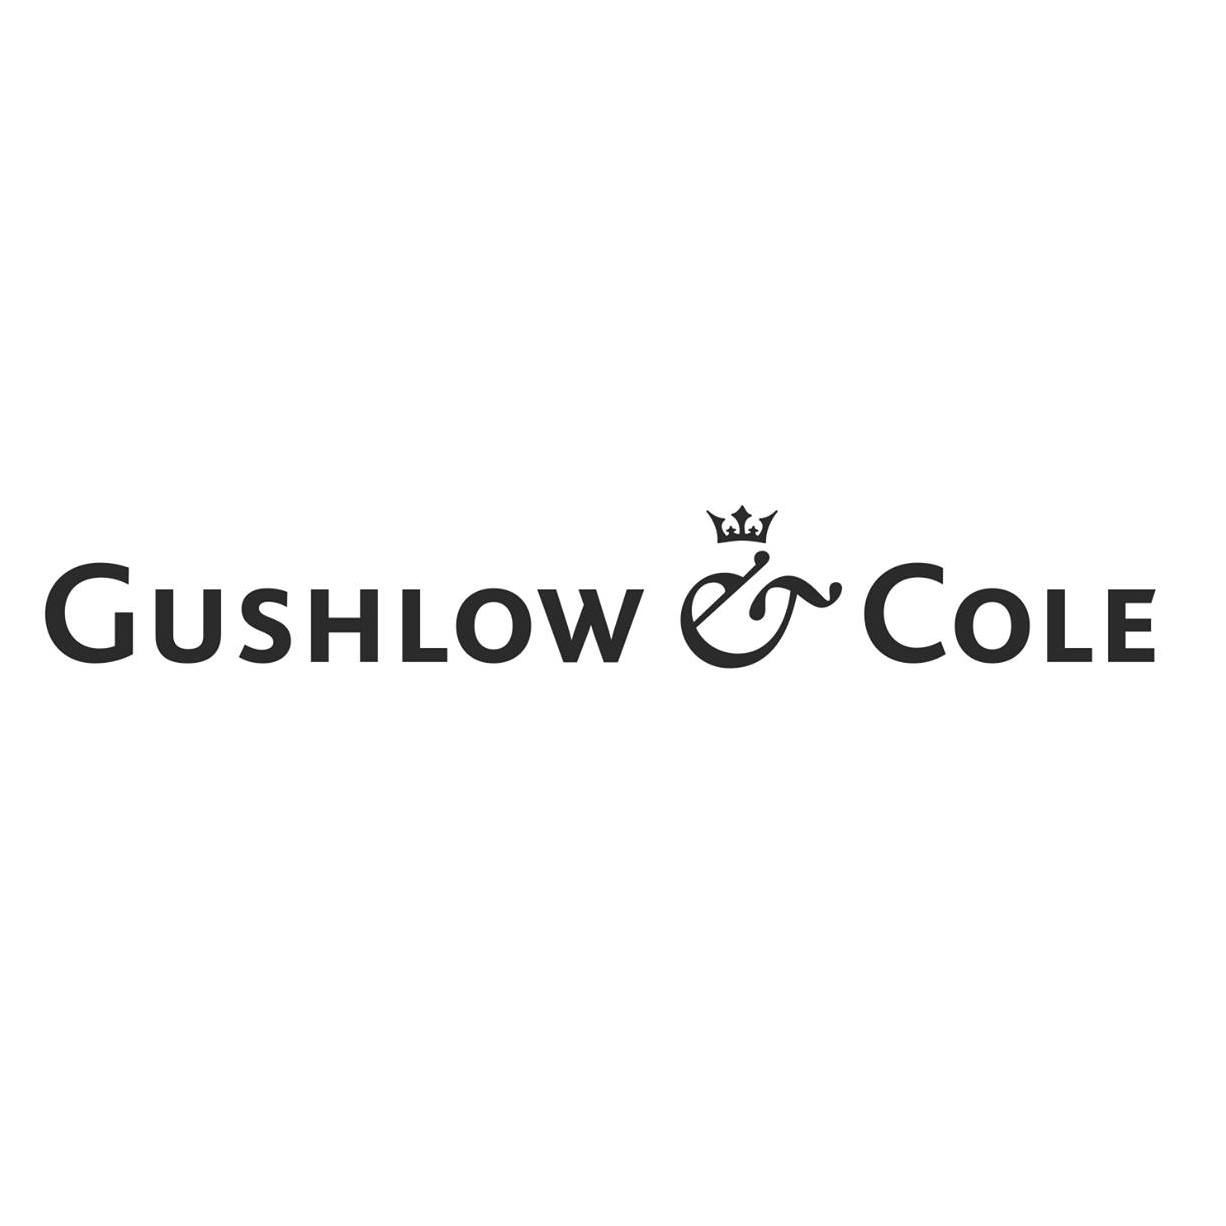 Gushlow & Cole